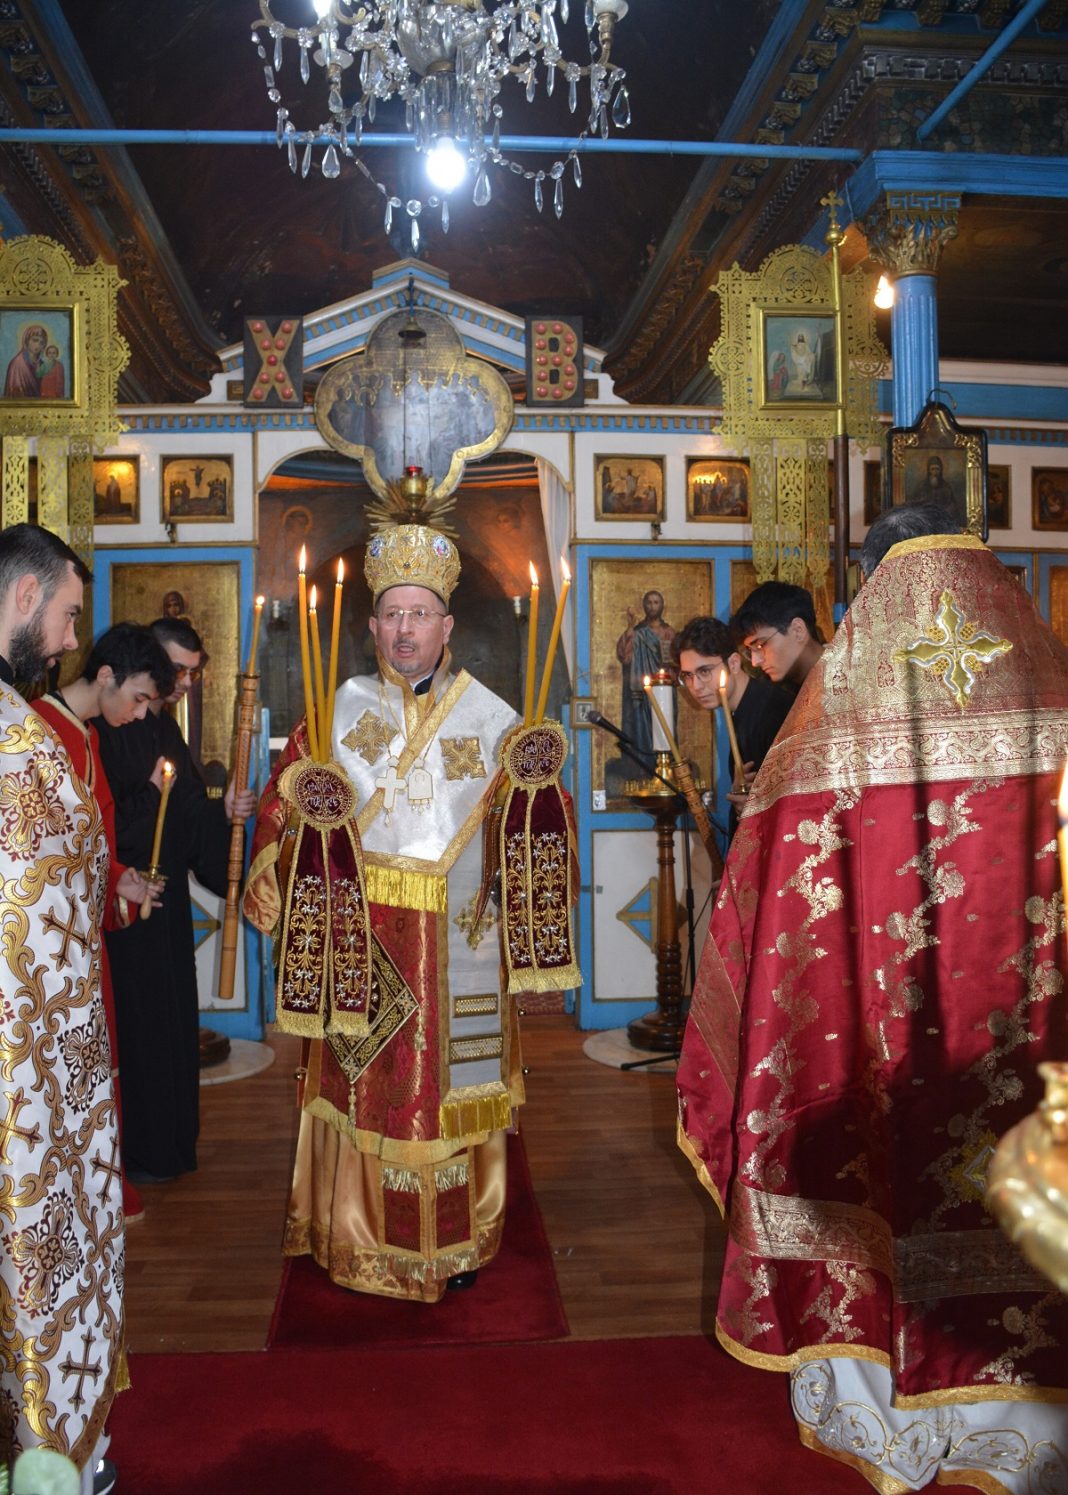 The Feast Day of Saint Andrew the Apostle at the Vatopedi Metochion of Galata in Constantinople